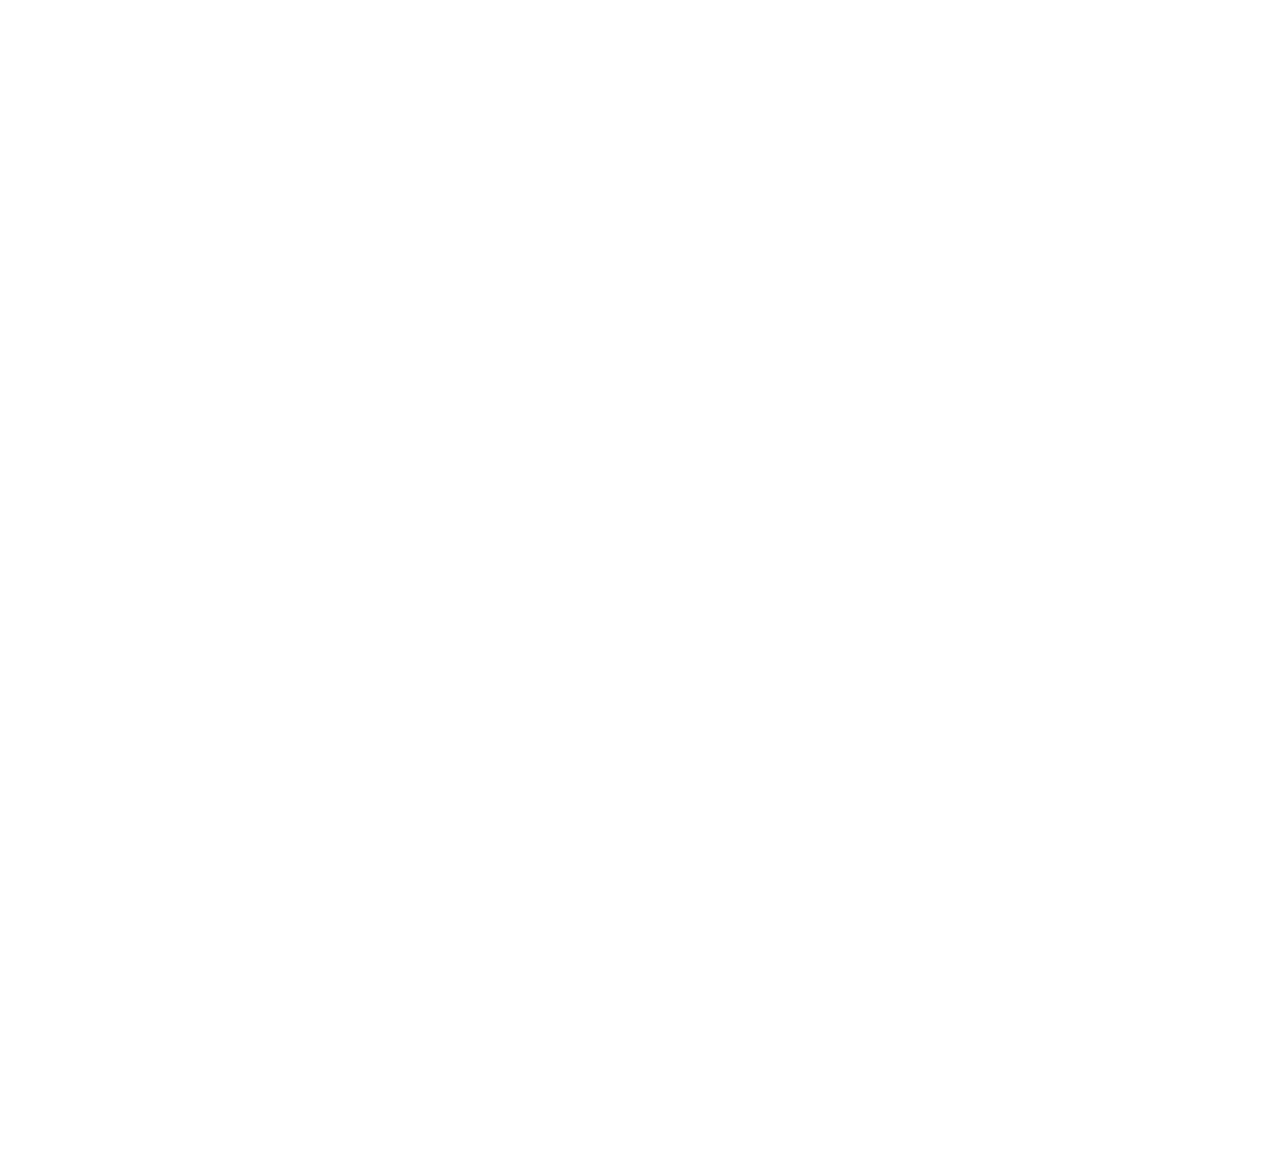 The Conscious Music Project